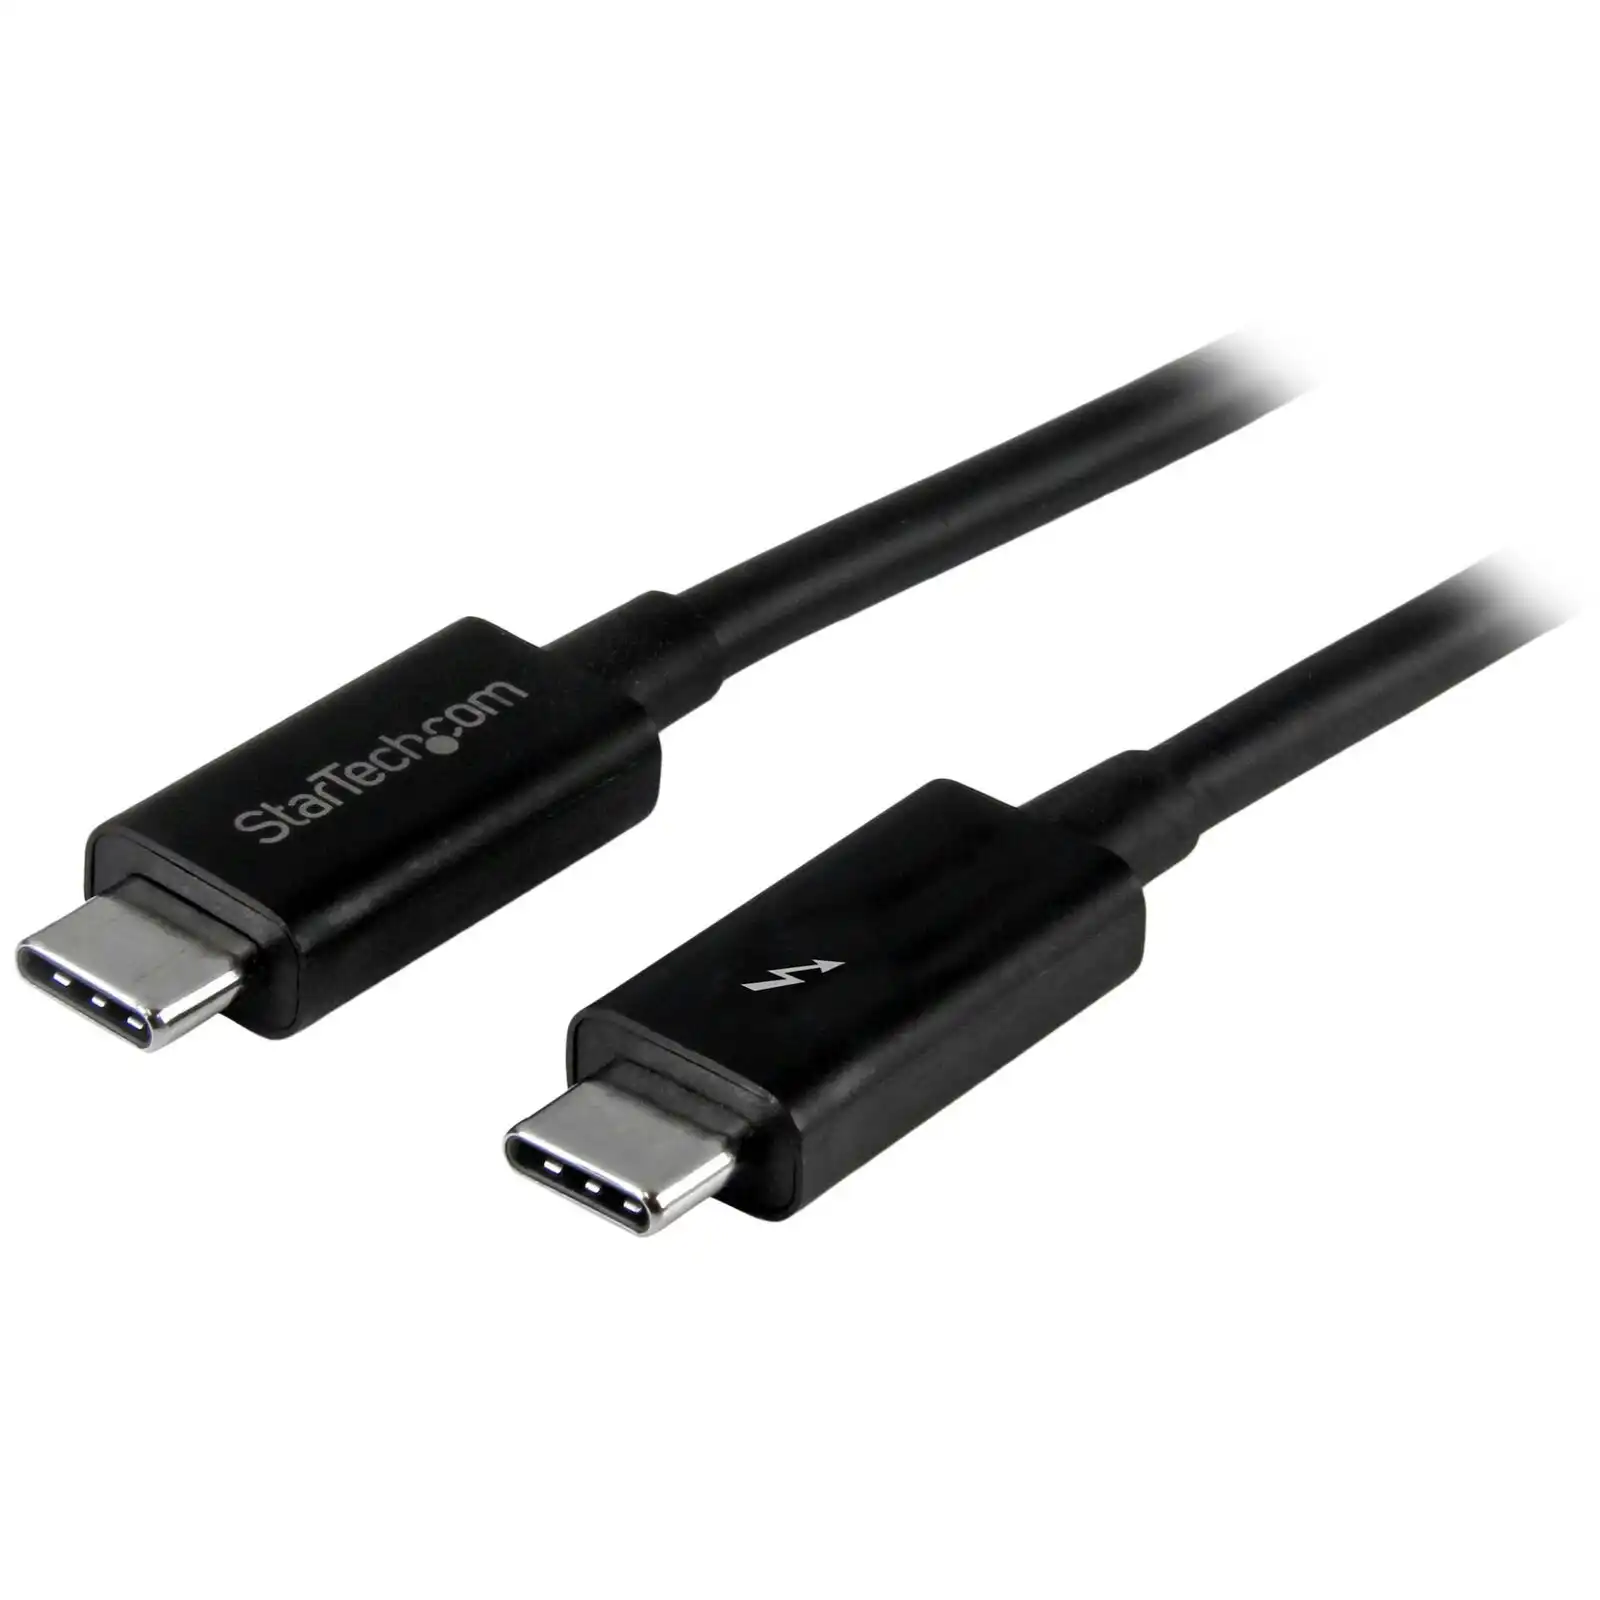 Star Tech 1m Thunderbolt 3 20Gbps USB-C Cable For 4K/60Hz PC/Laptop/Monitor BLK